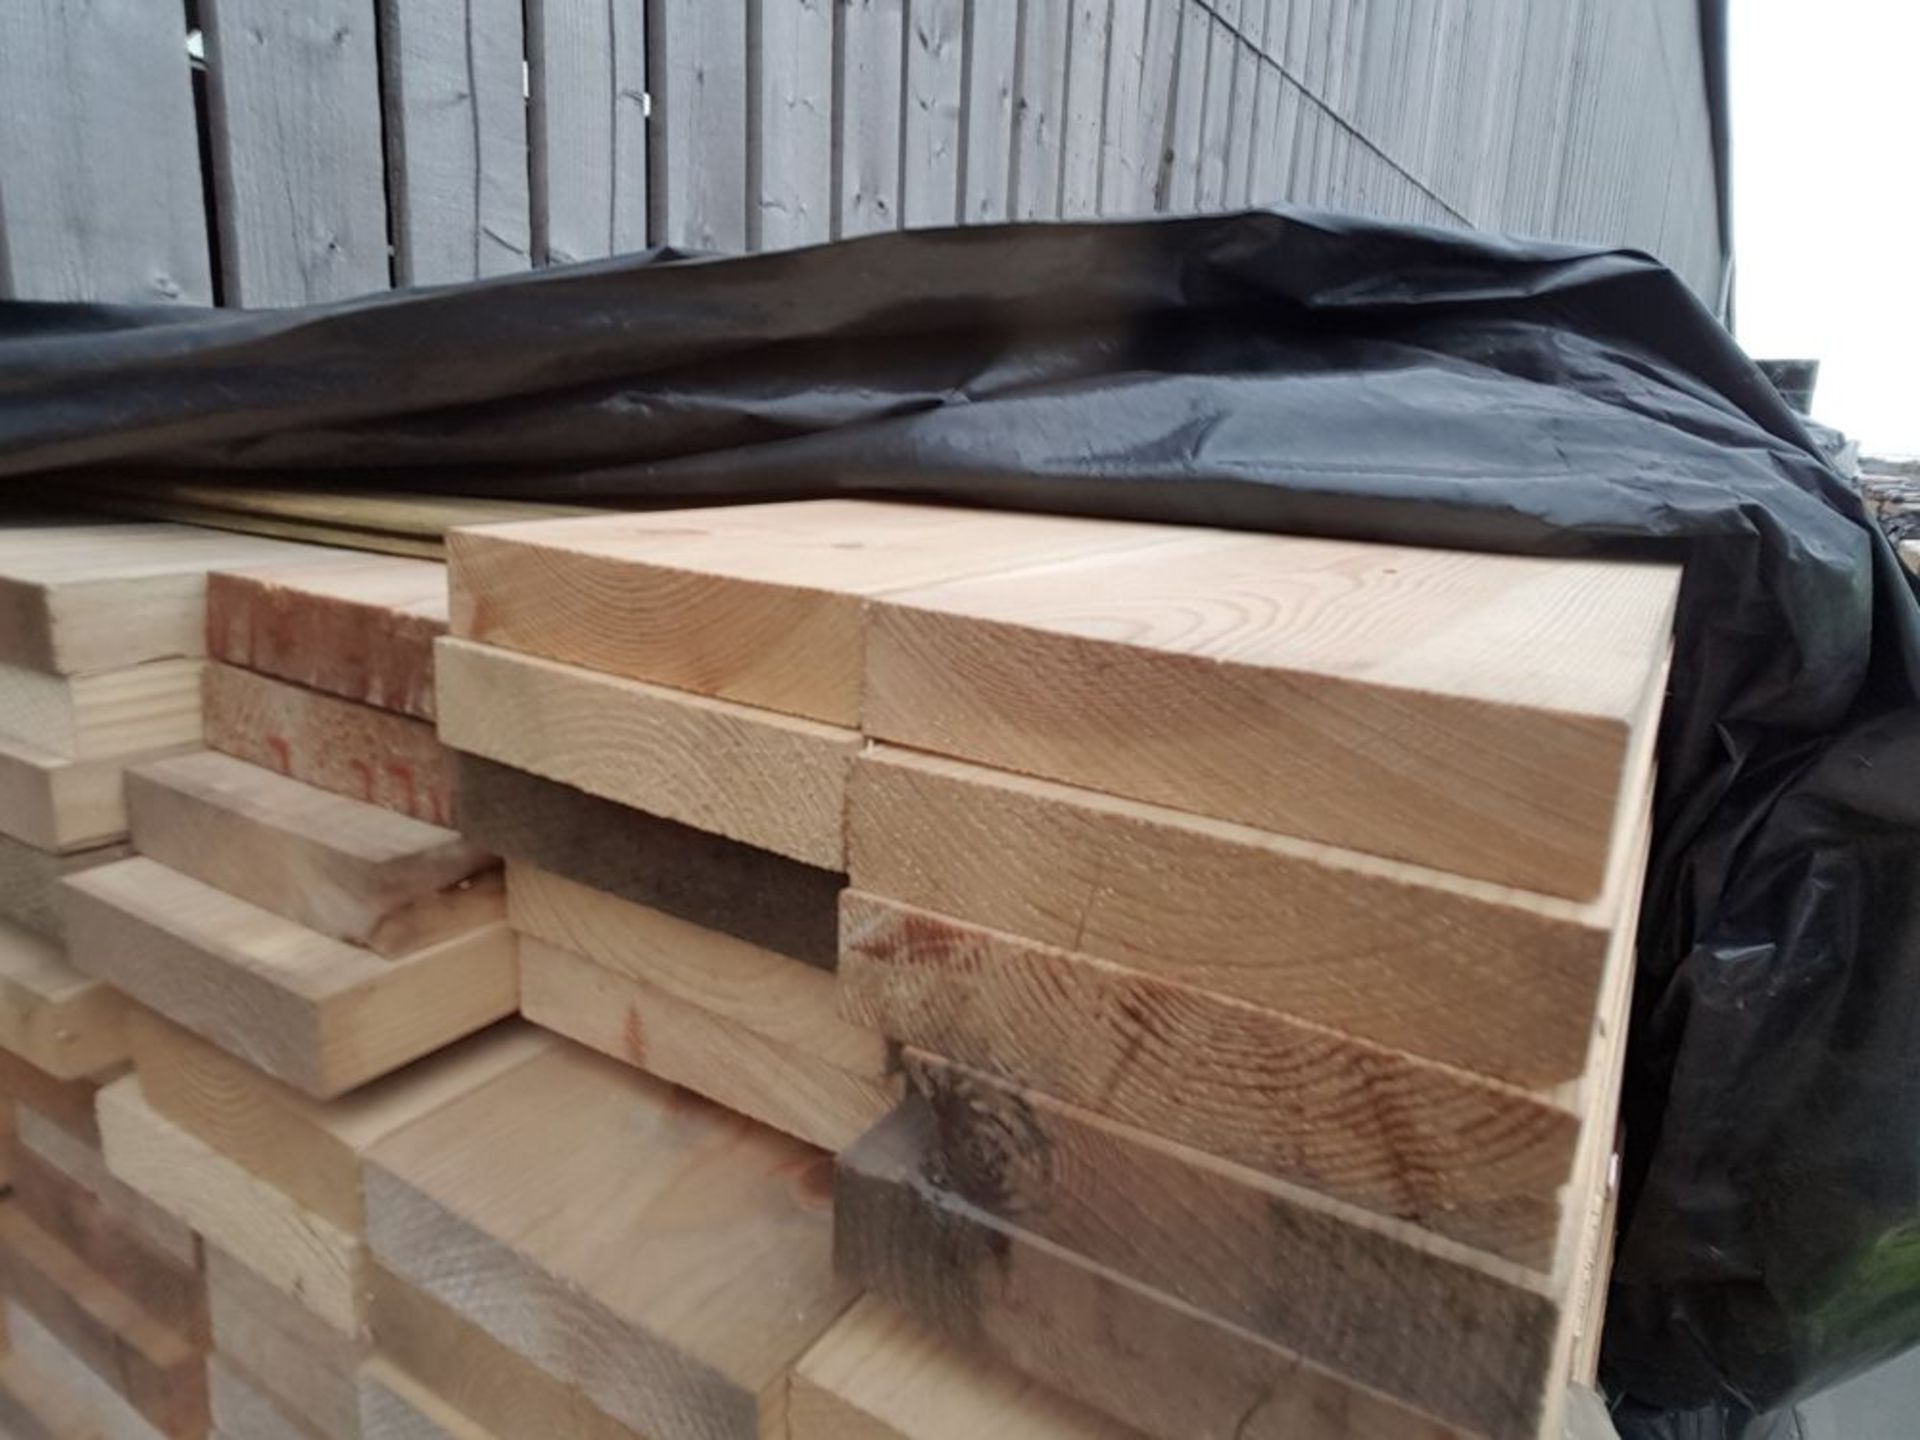 * 25x100 (20x95), planed square edged, 108 pieces @ 1120mm. MX0522. Please note this lot is